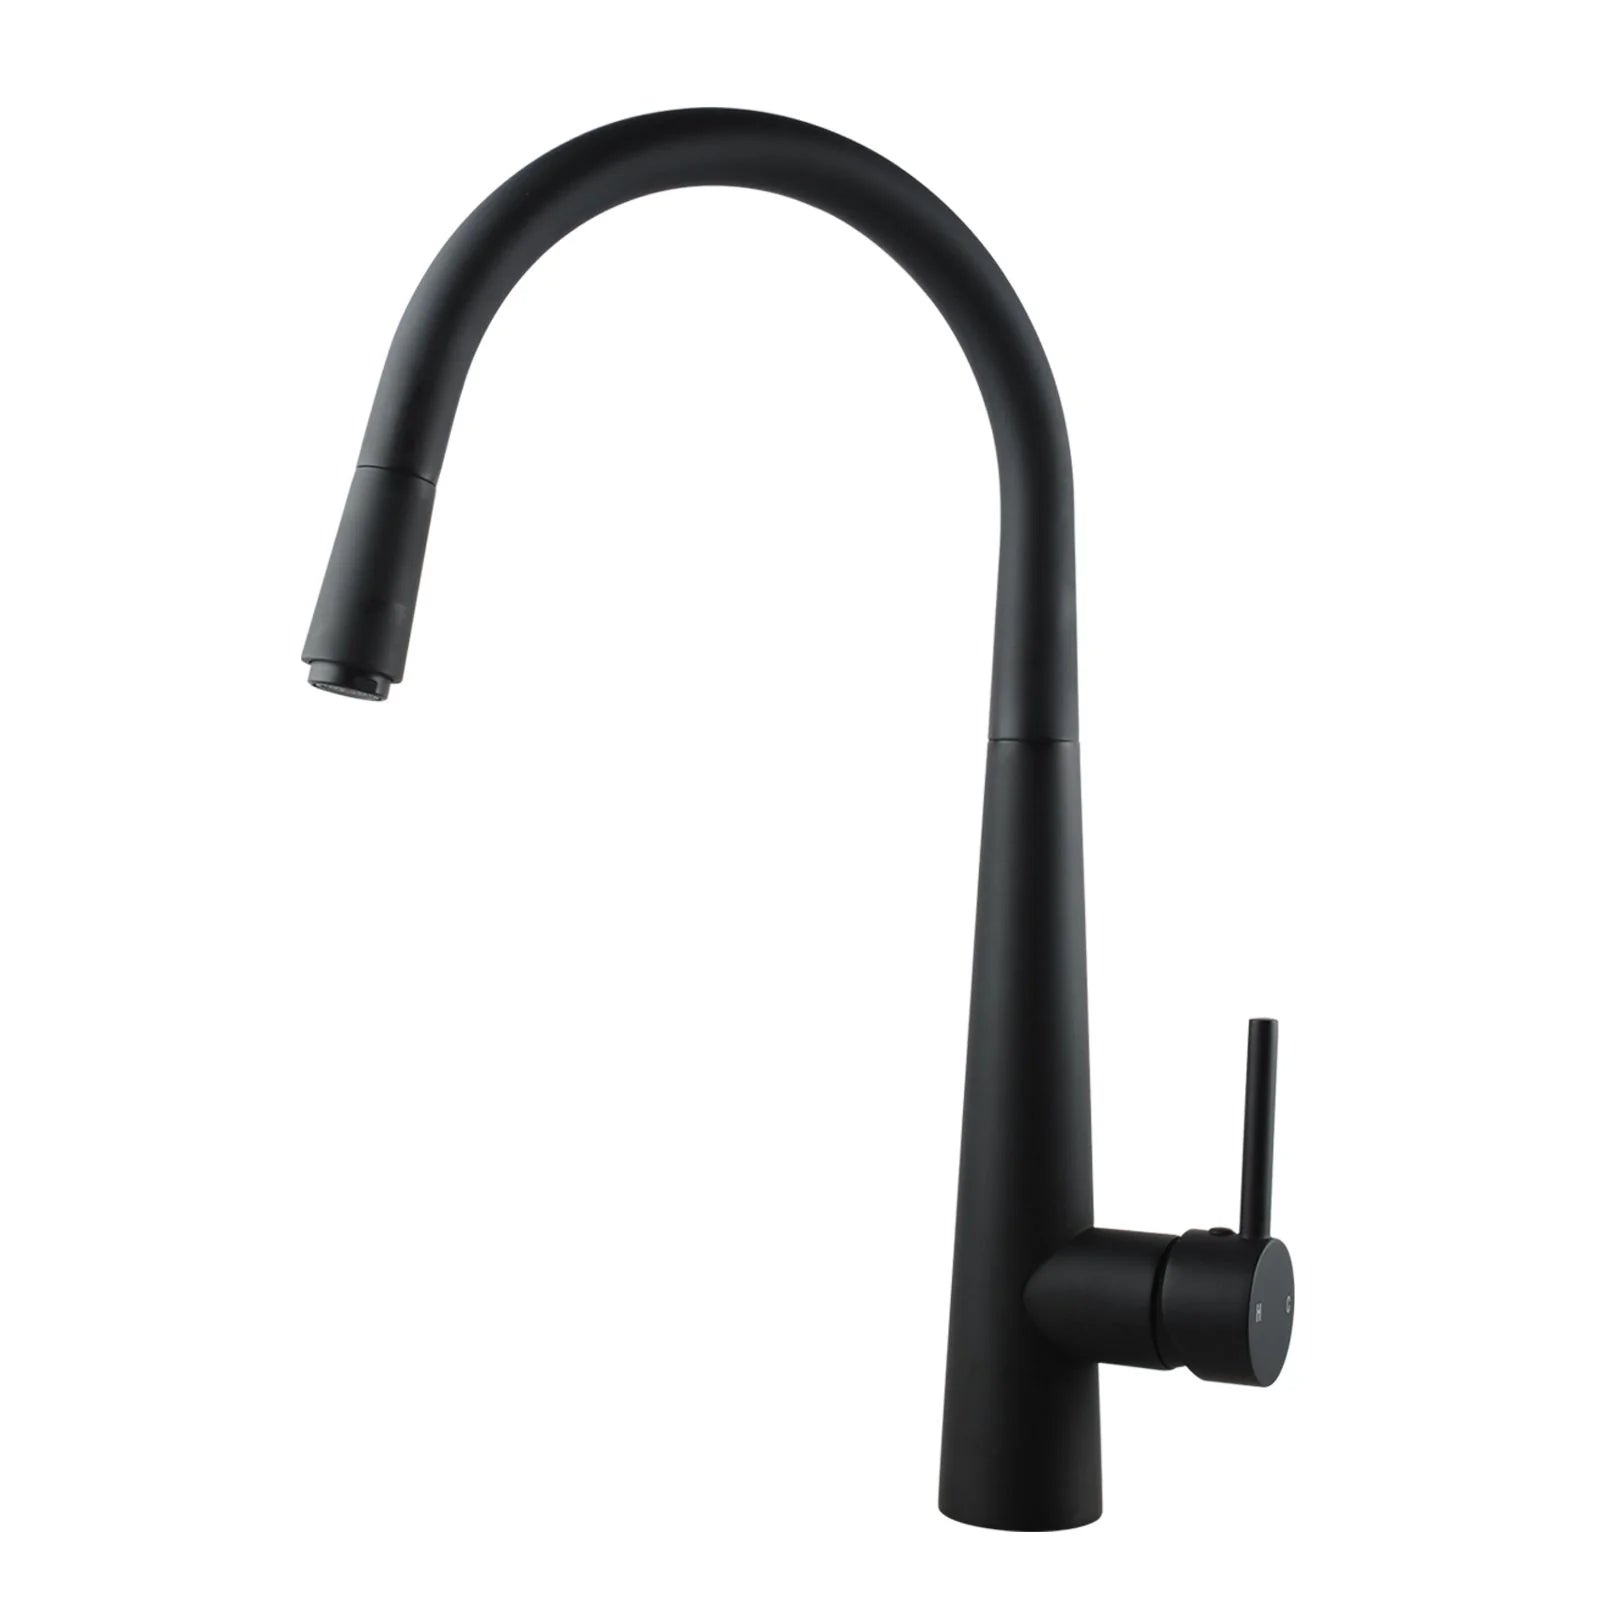 Round Pull Out Kitchen Sink Mixer Tap: Convenient and versatile addition to your kitchen-OX1021.KM